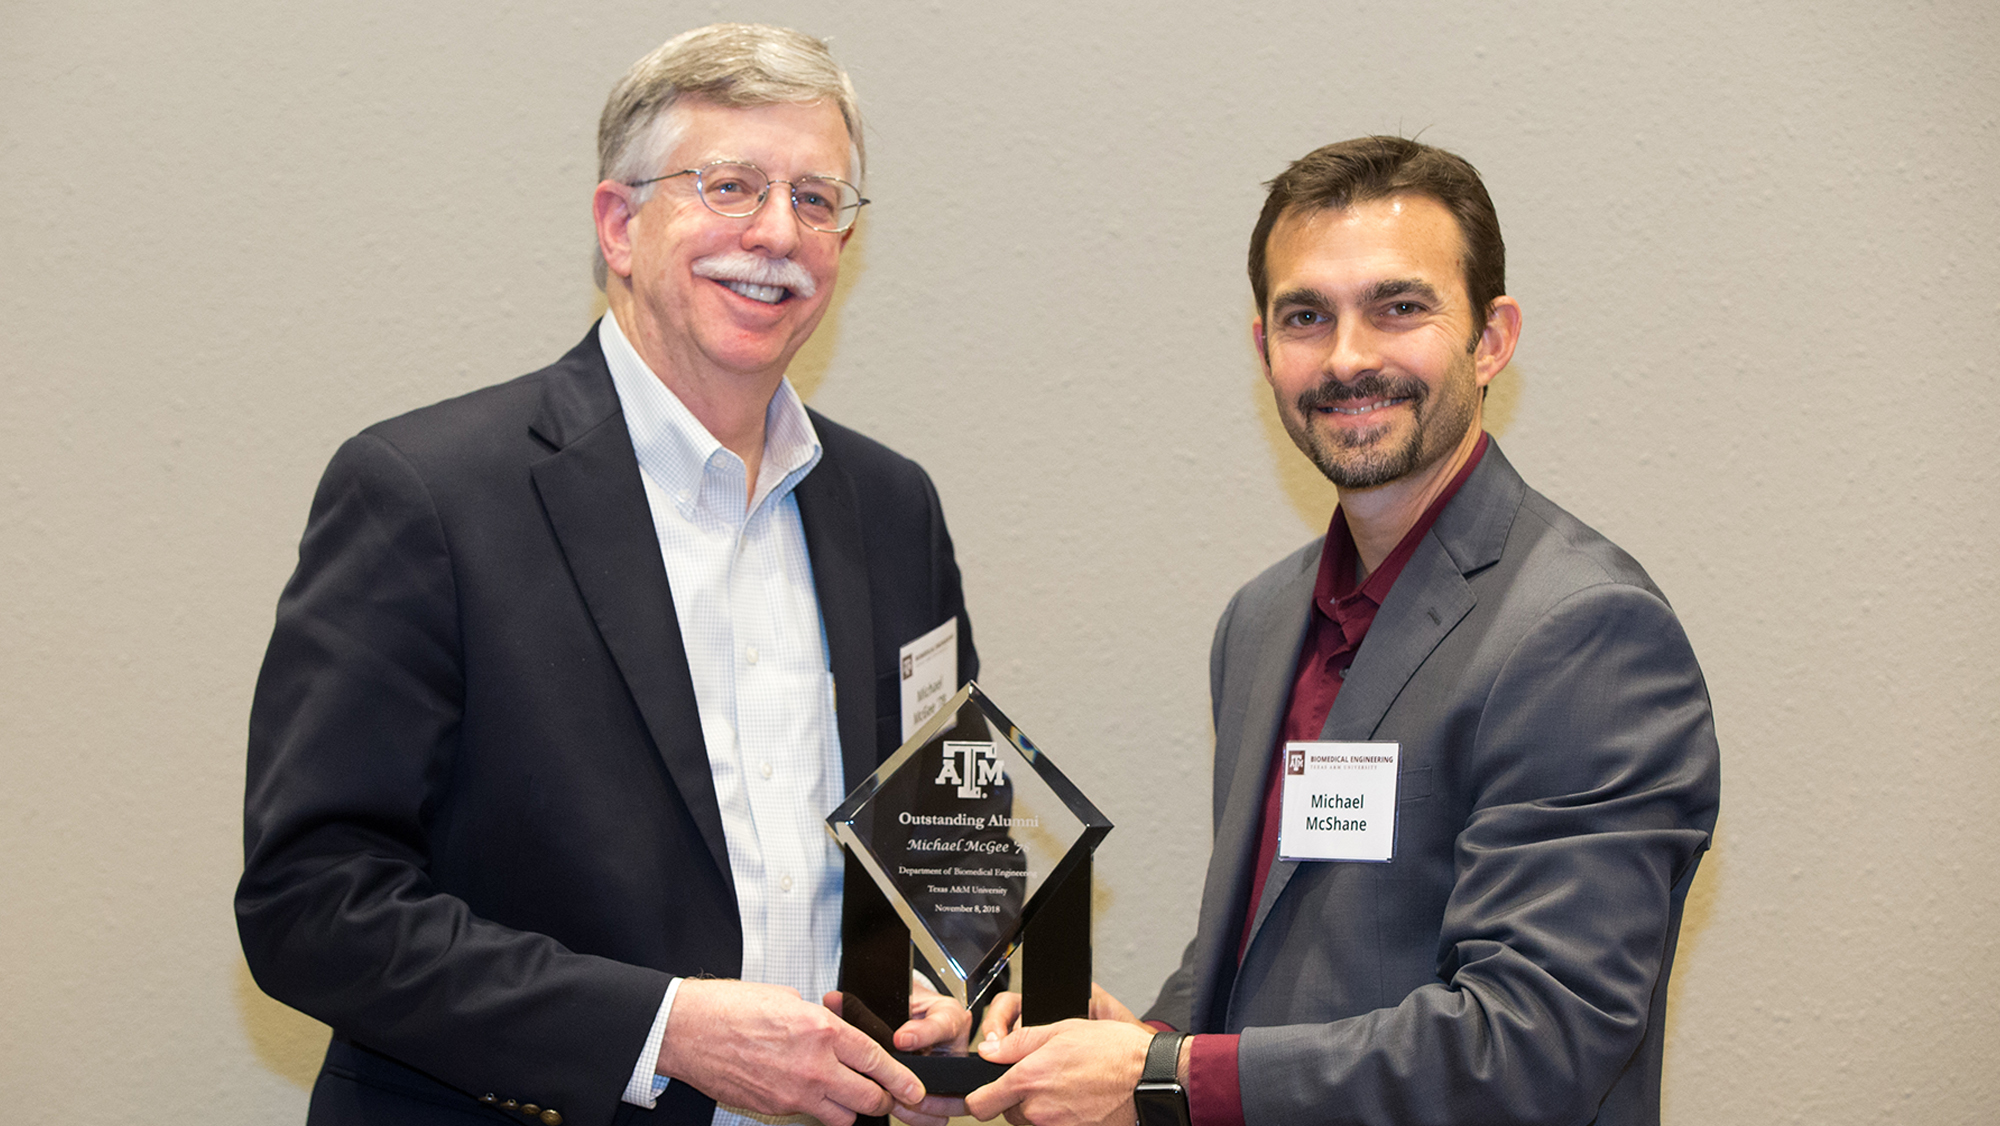 Mike McGee is presented with the crystal Biomedical Engineering Oustanding Alumni Award by Dr. Michael McShane.